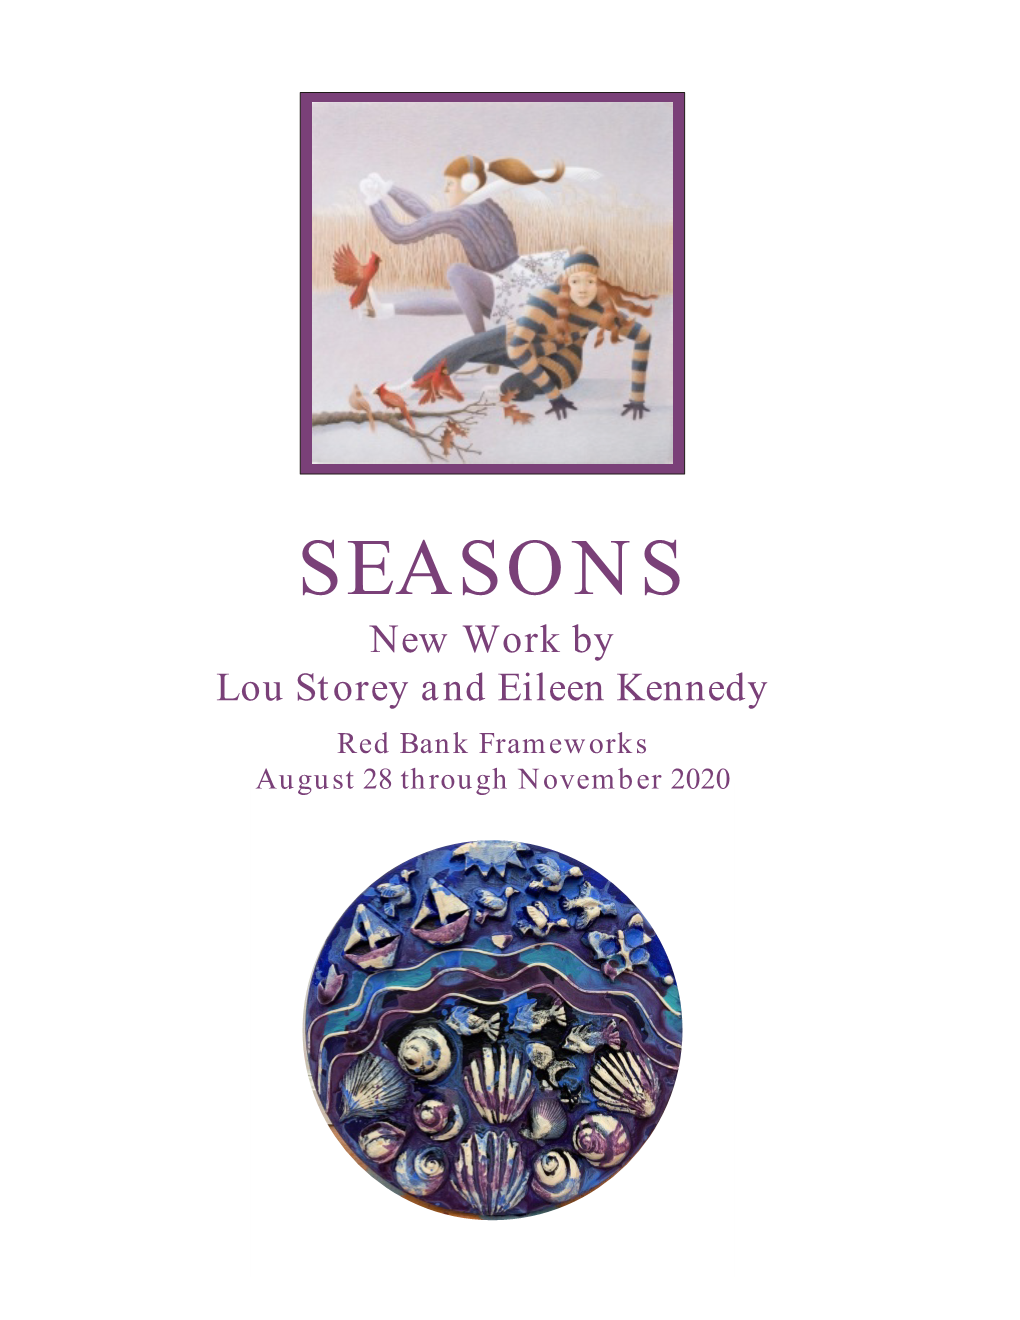 SEASONS New Work by Lou Storey and Eileen Kennedy Red Bank Frameworks August 28 Through November 2020 SEASONS: New Work by Lou Storey and Eileen Kennedy